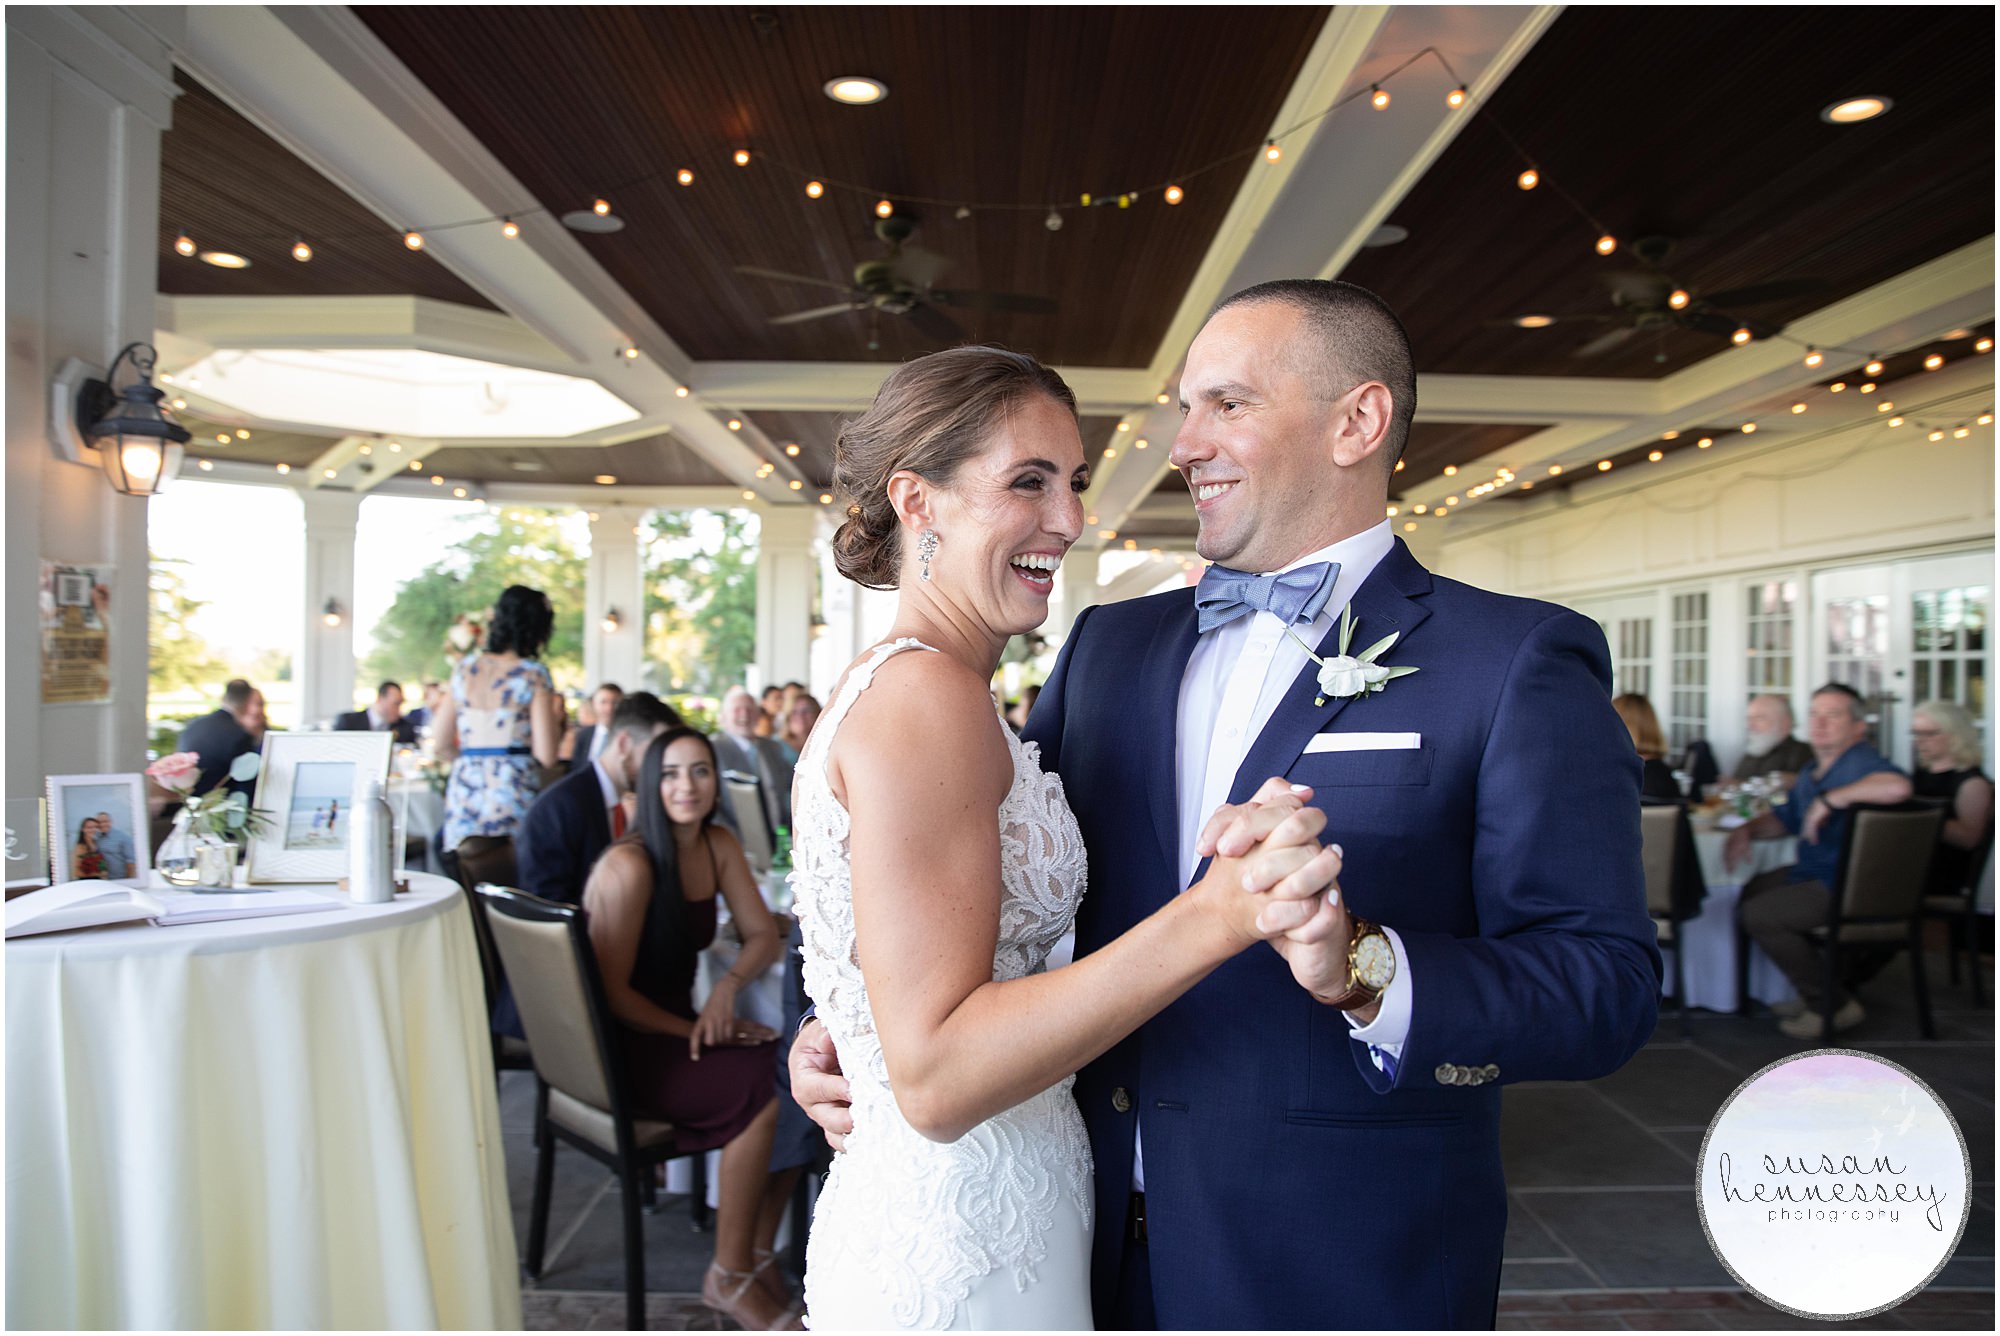 First dance for bride and groom at Atlantic City Country Club outdoor wedding